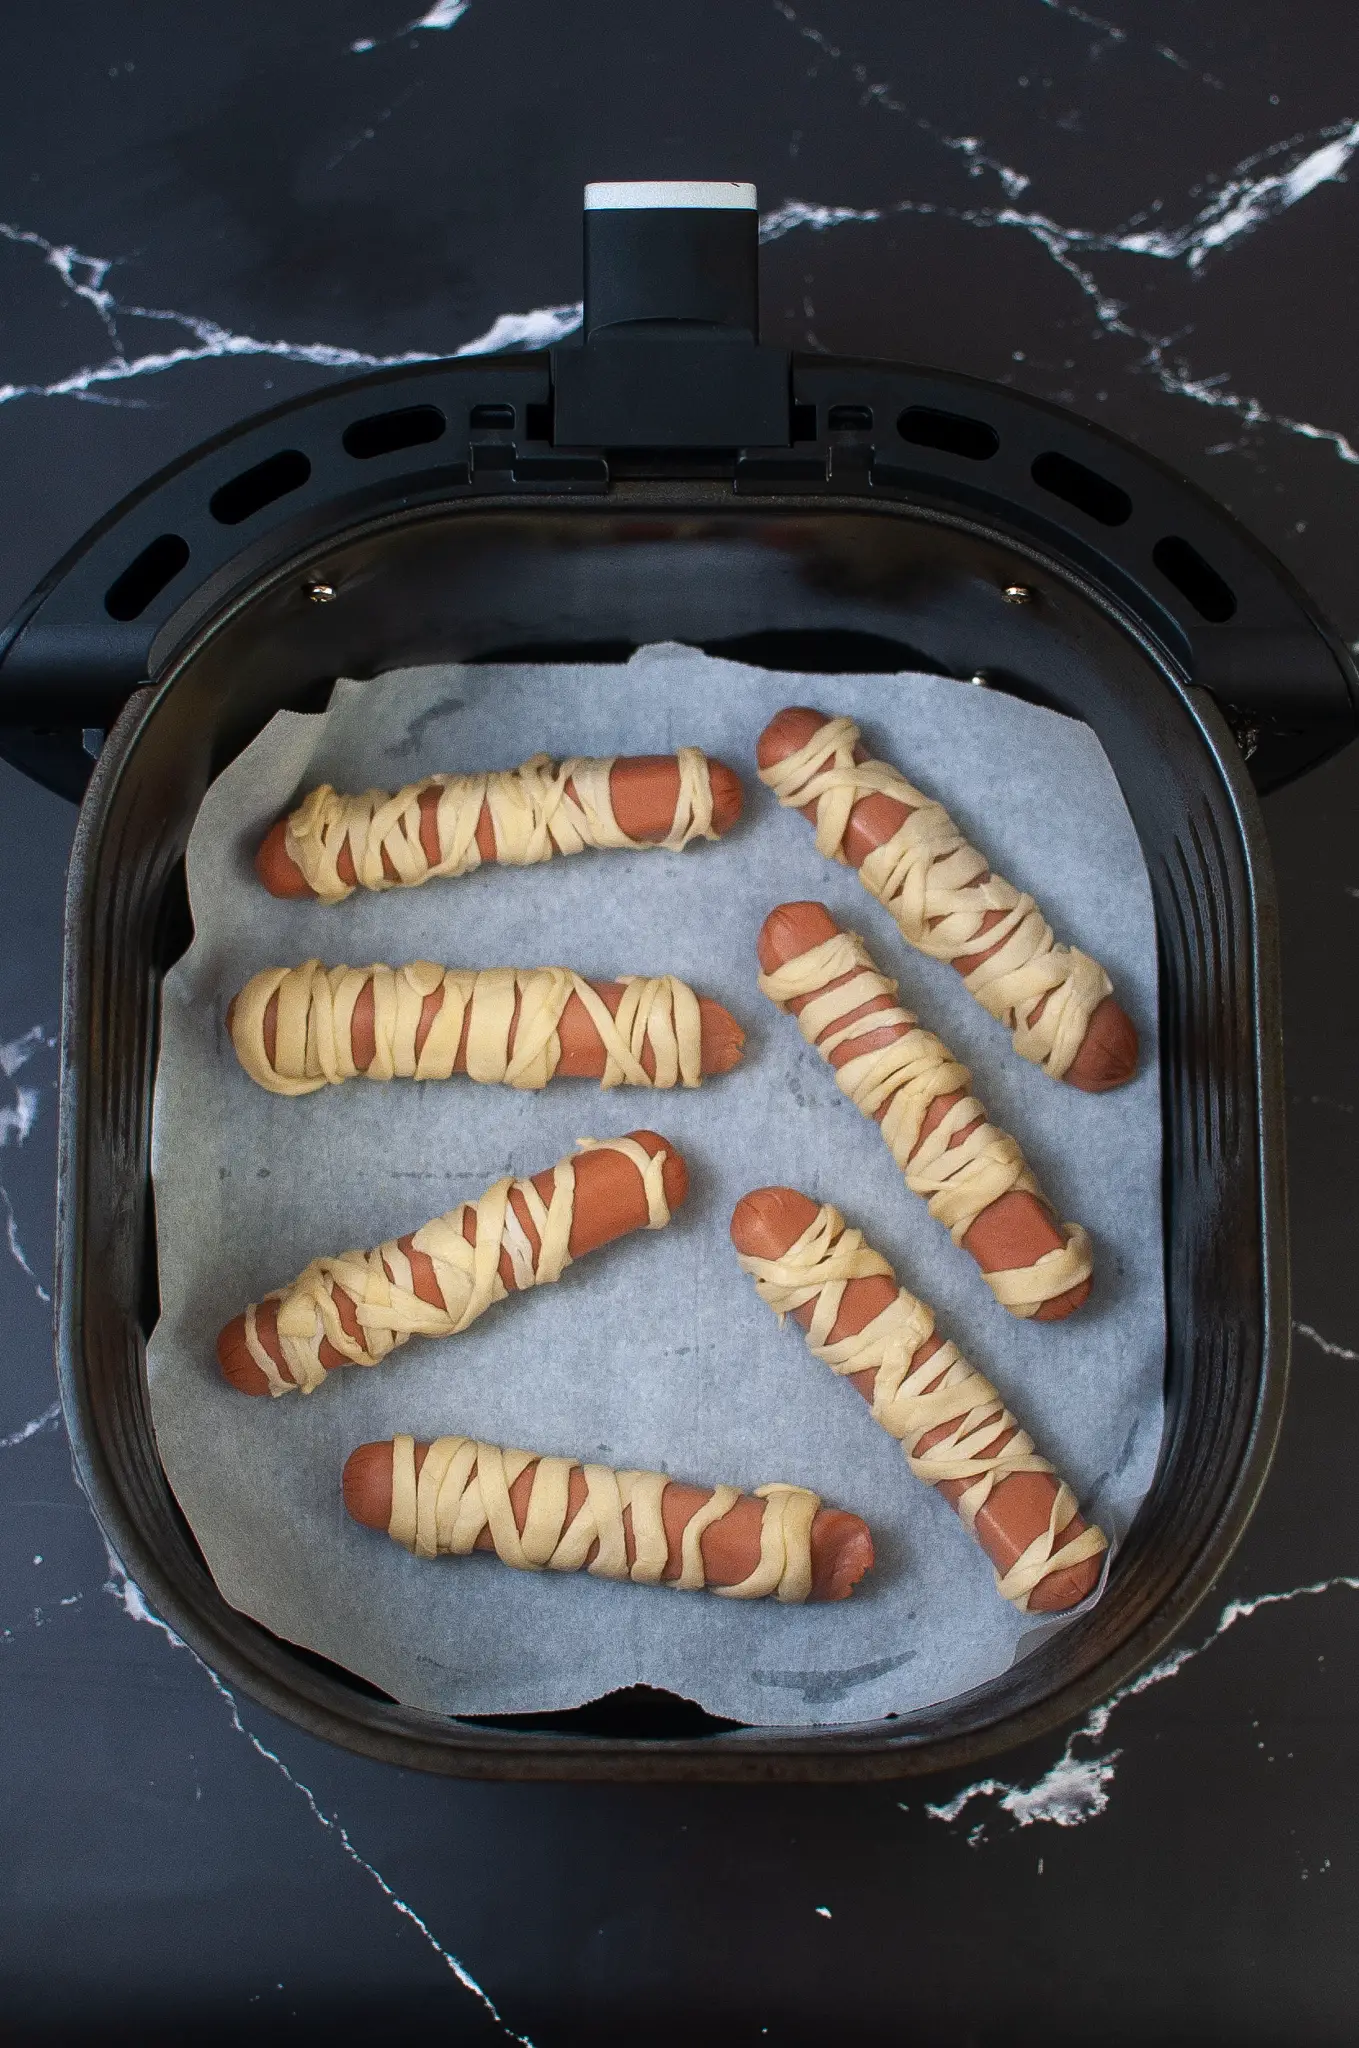 Hot dogs are wrapped in strips of crescent rolls strips, and placed in the Air Fryer